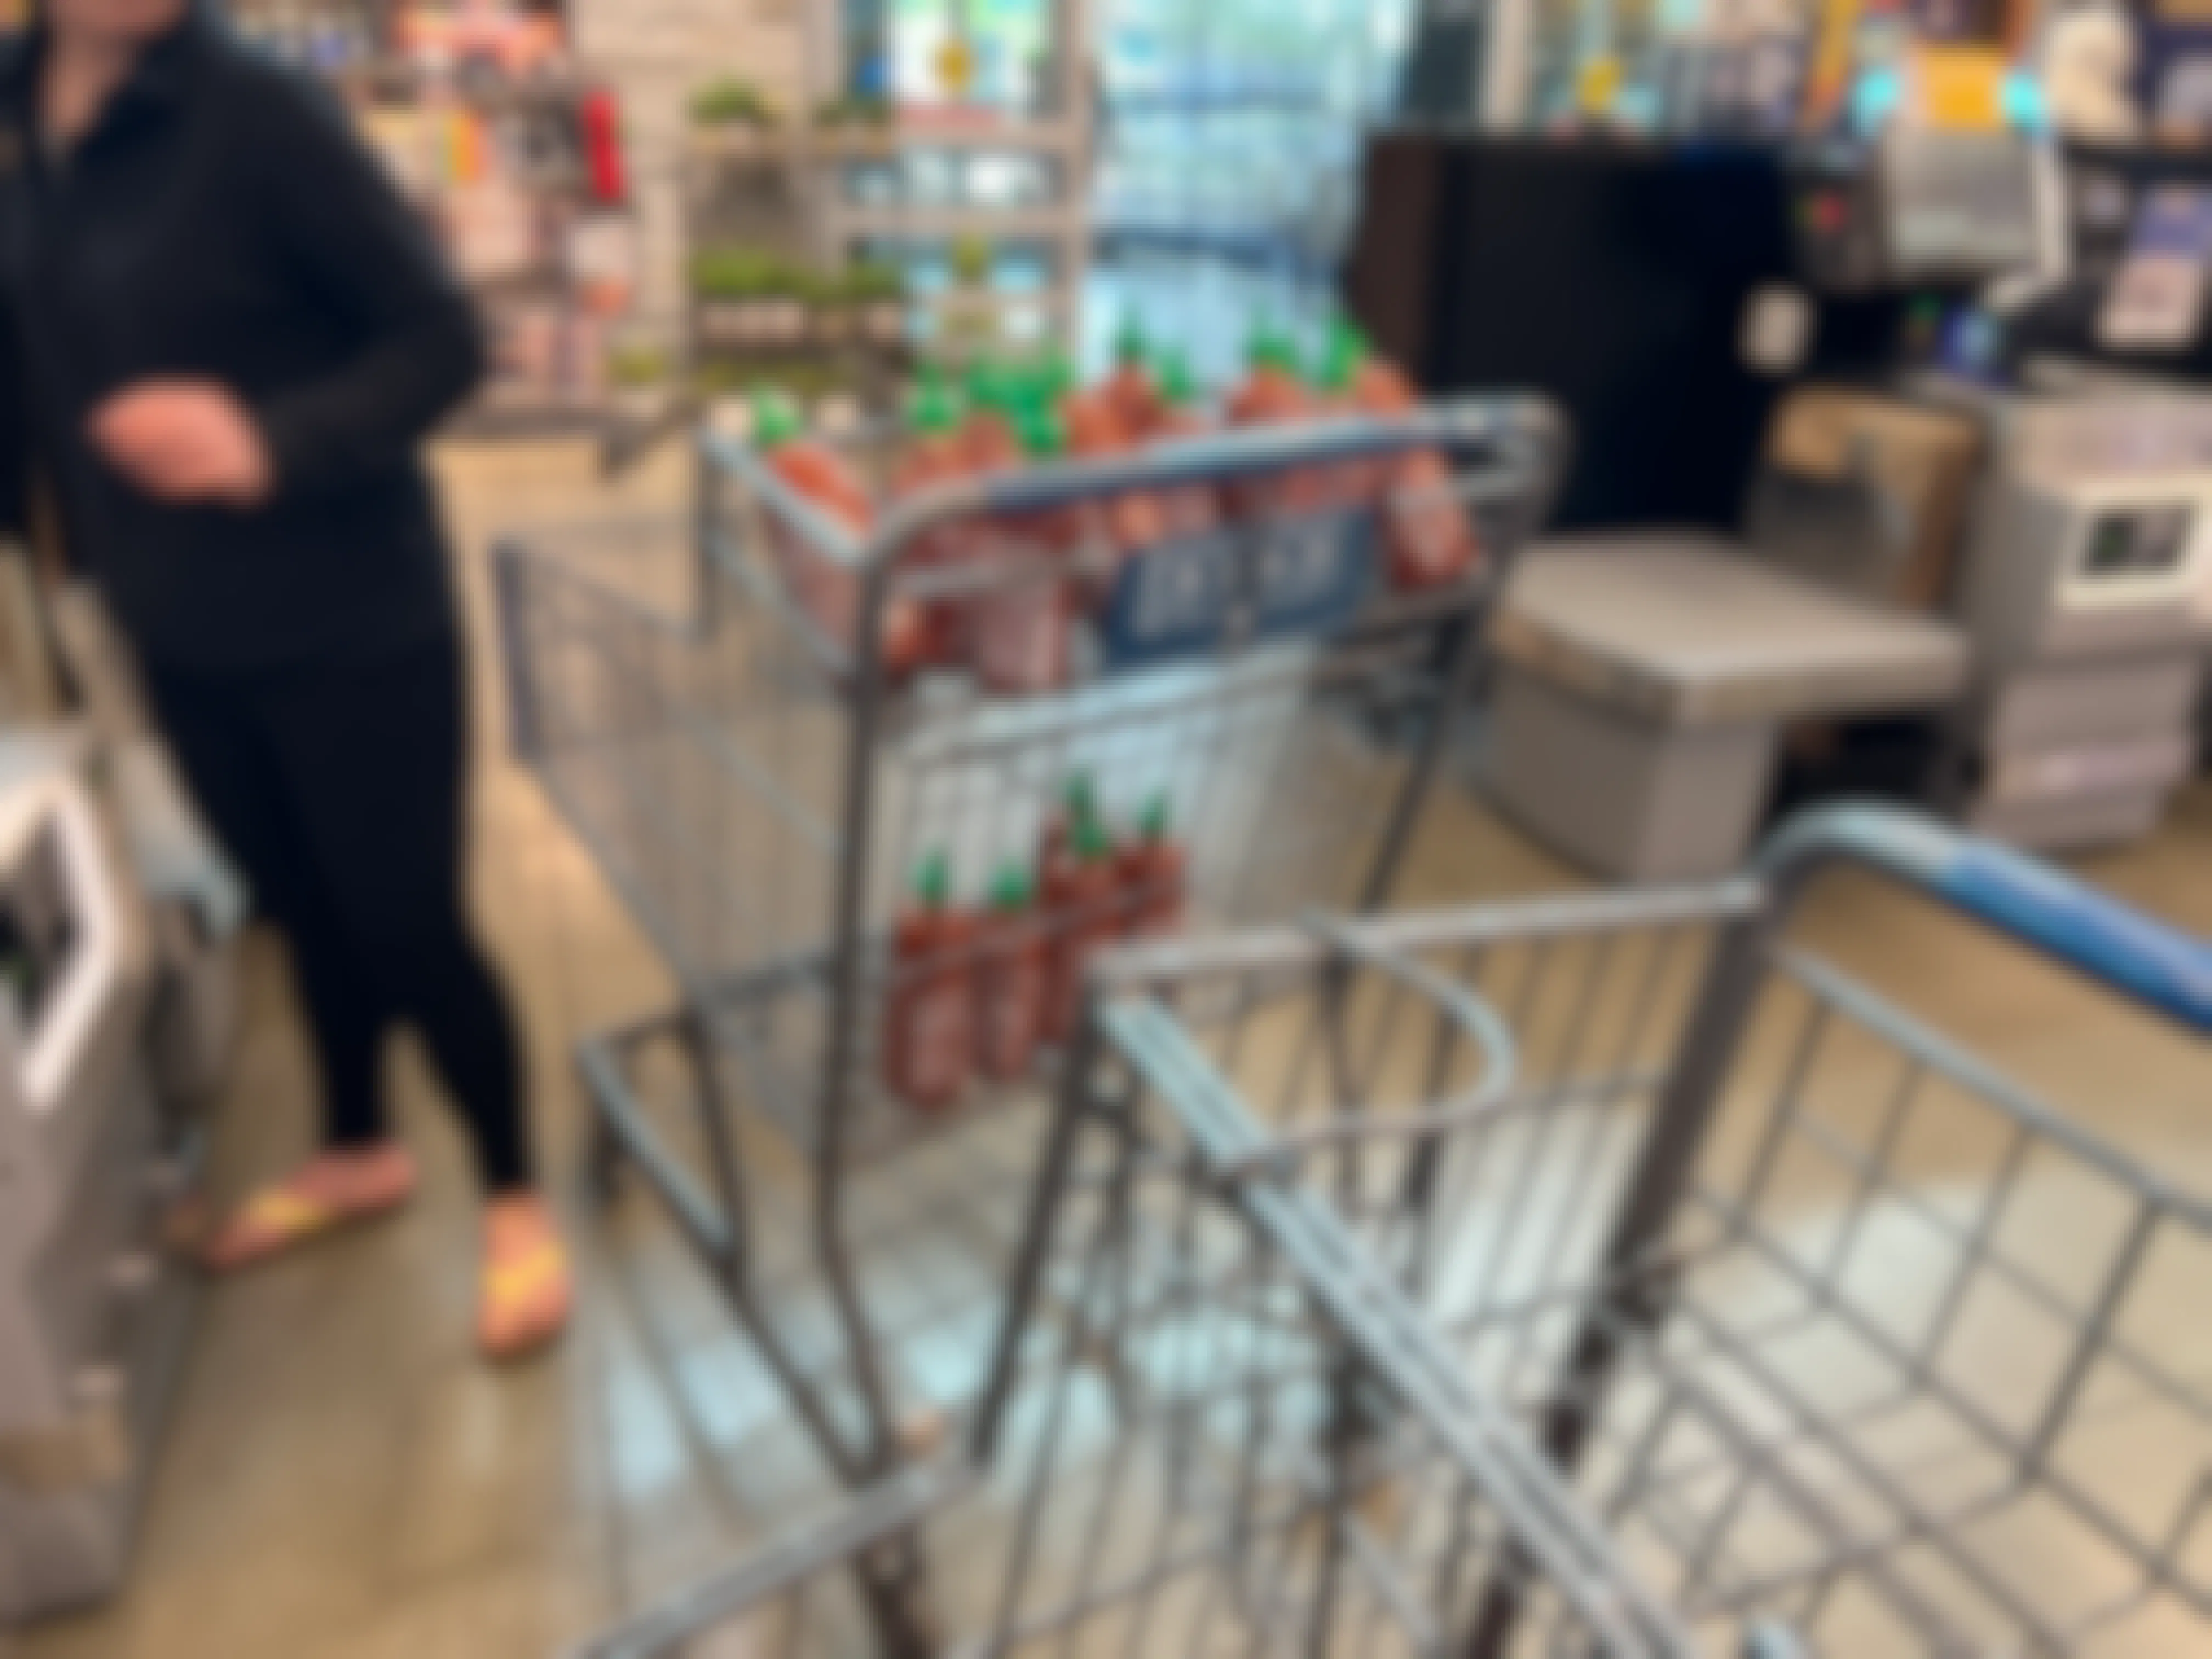 A customer with a cart full of Sriracha bottles in the line at Albertson's checkout.